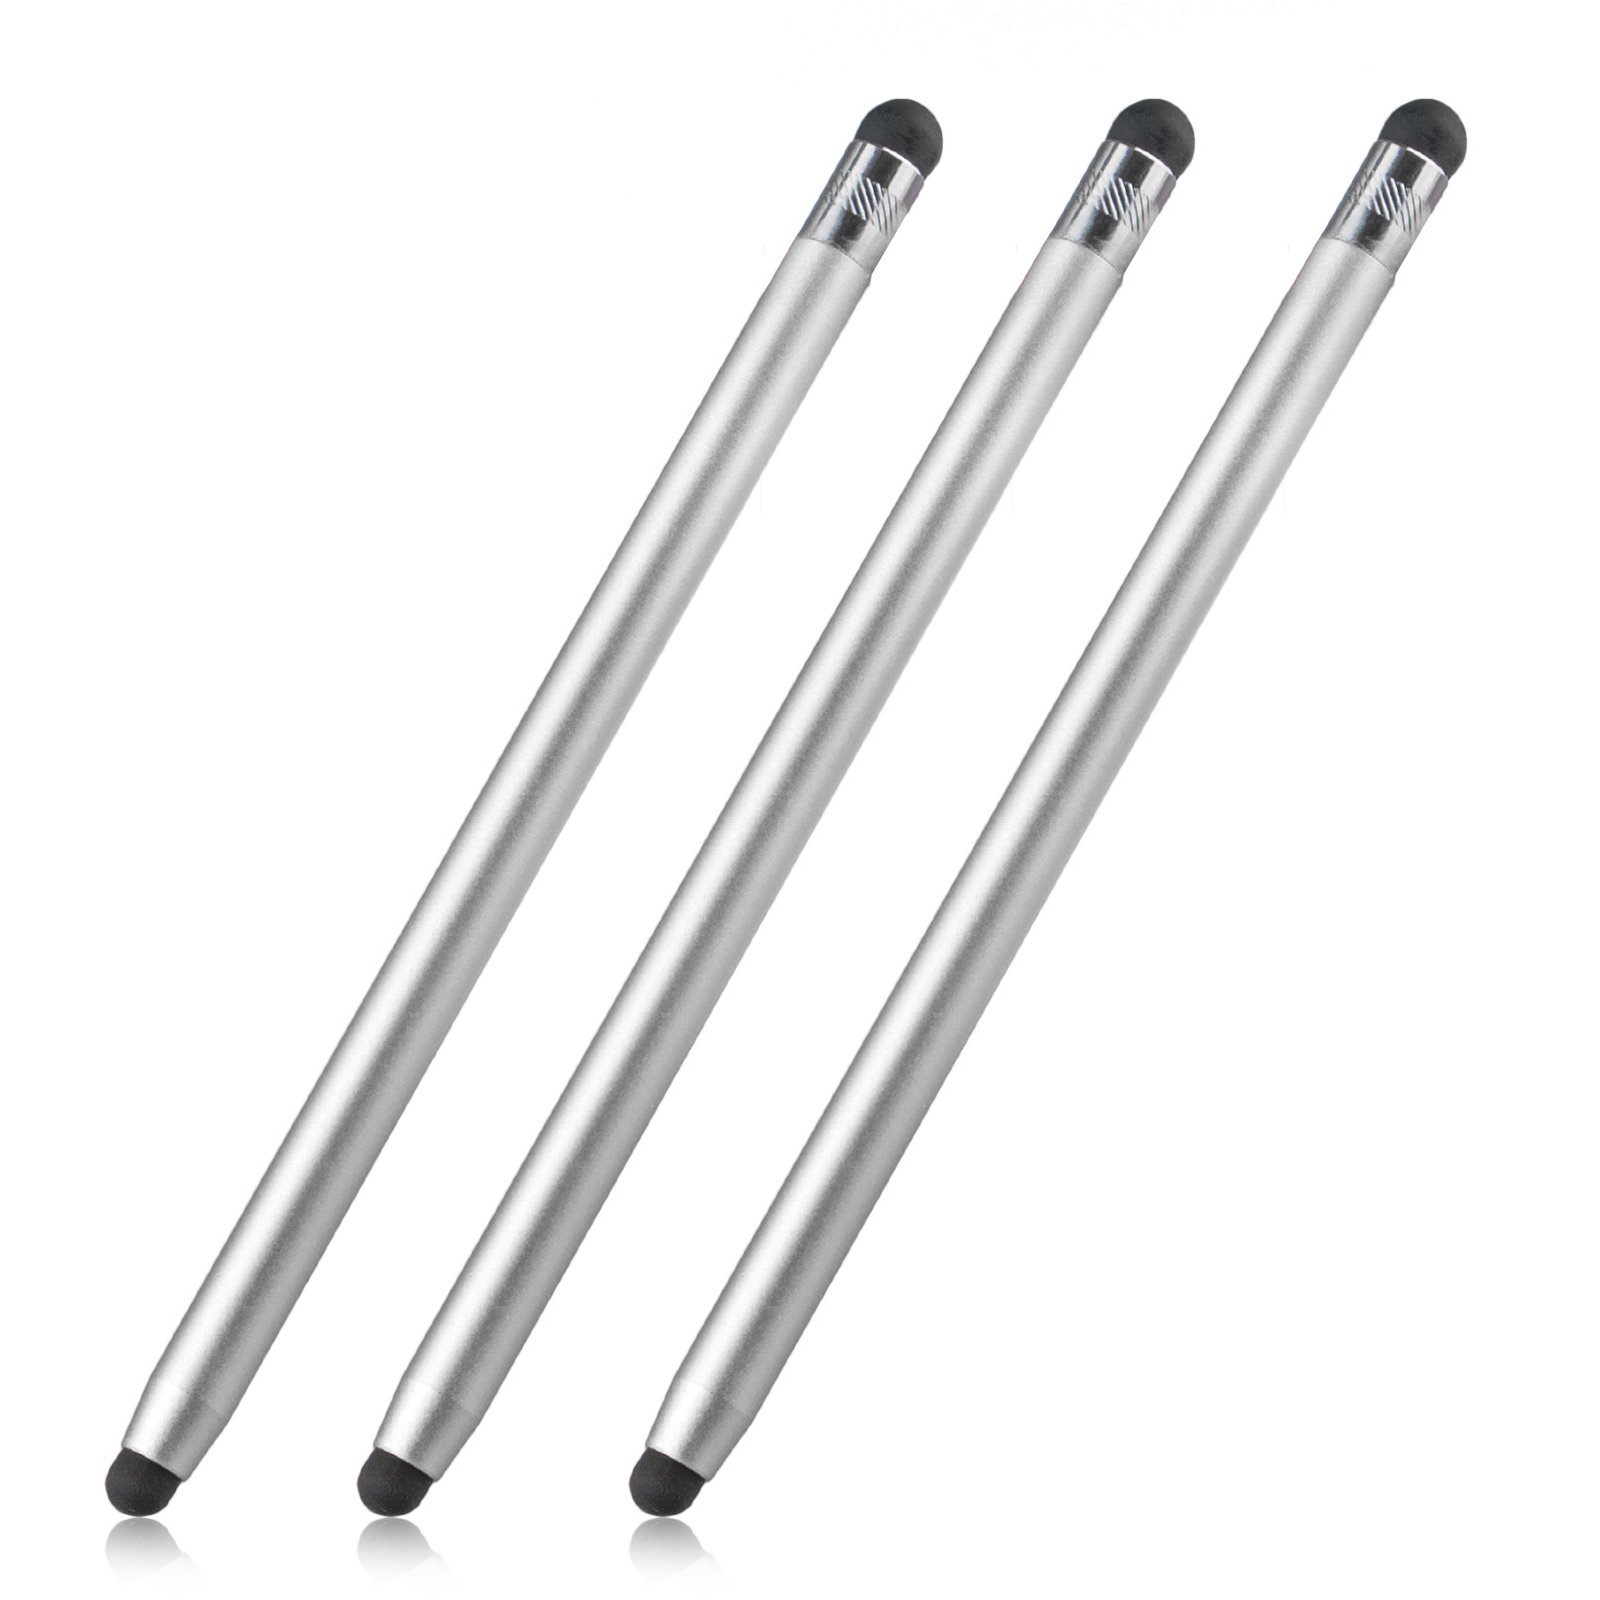 Stylus Pen, EEEkit 3 Pcs 2 in 1 Universal Touch Screen Pen Slim Replacement Capacitive Stylus Pen For  iPhone iPad Samsung Tablet Smartphone PC and More Touch Screens Devices - image 1 of 8